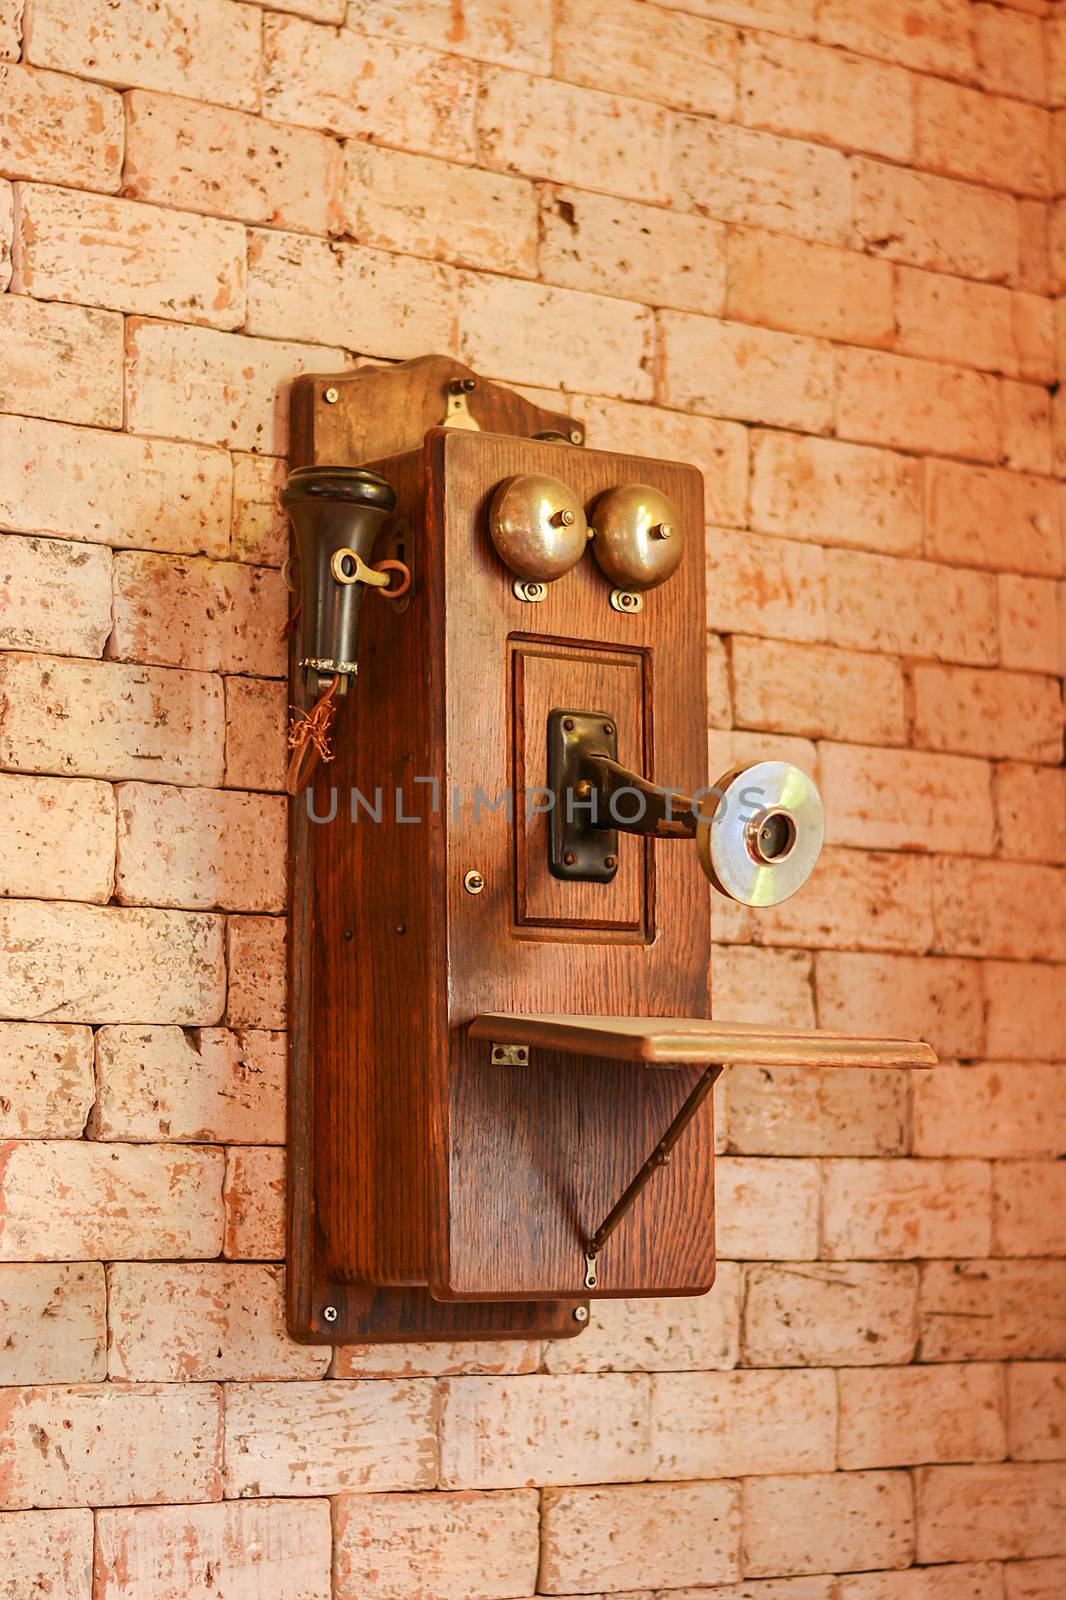 Antique wooden telephone, Vintage Telephone on grungy background by rakoptonLPN